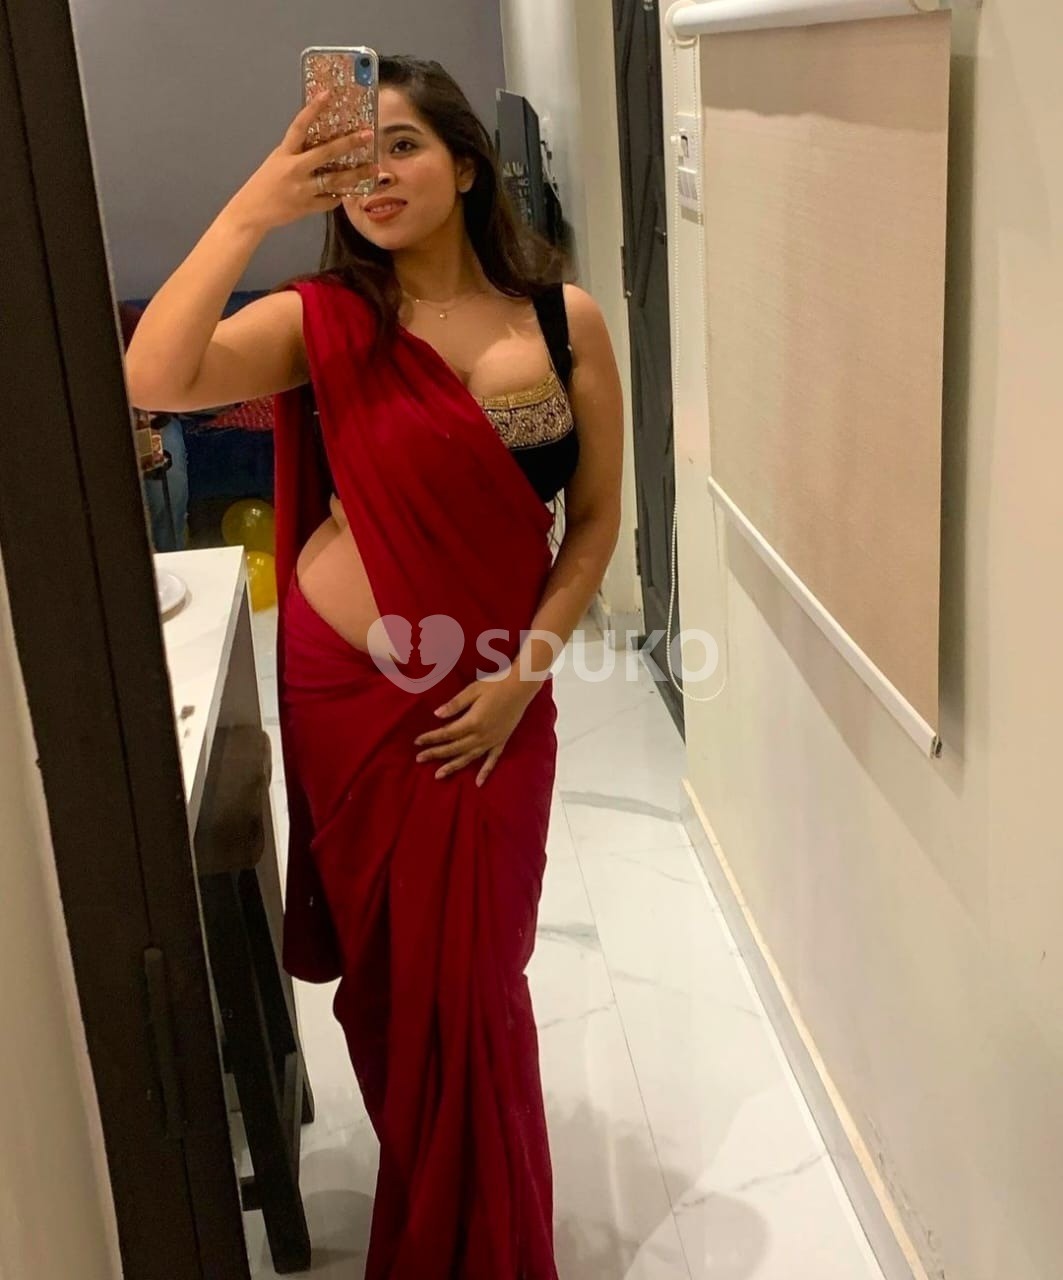 Indira nagar 🔝 HOT GIRL FULLY SATISFIED all LOW PRICE FULLY SATISFIED